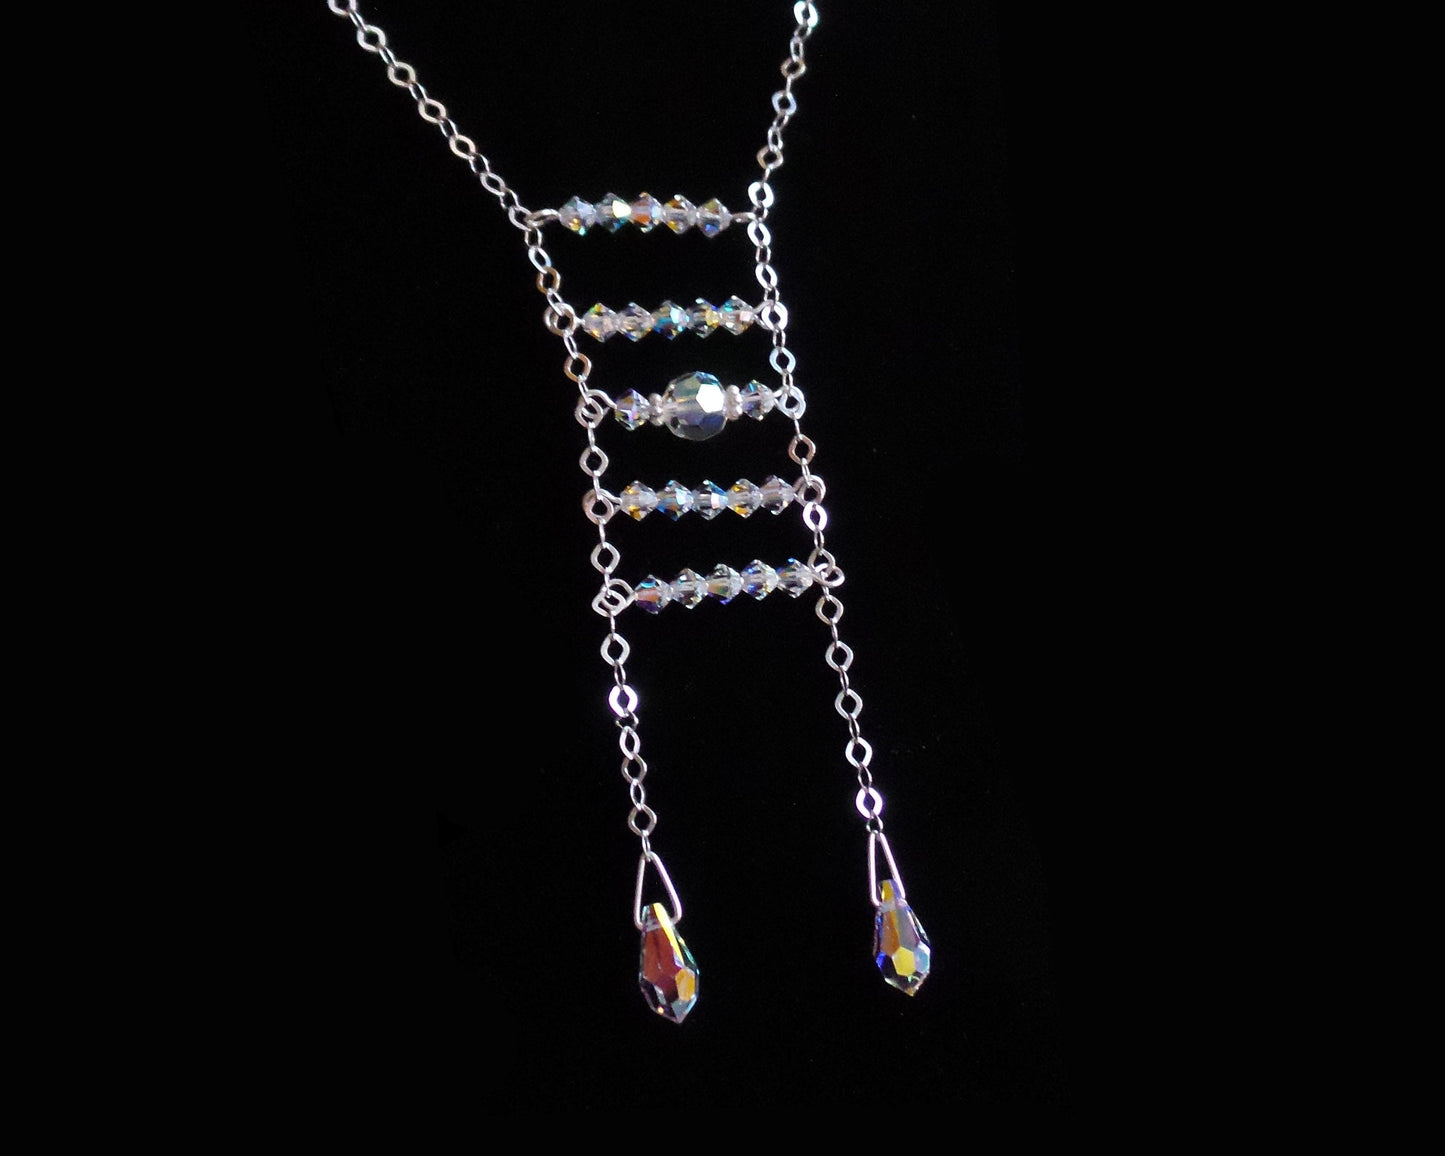 Art Deco Inspired Lariat Crystal Necklace,  A Sterling Silver, Clear AB Crystal Art Deco style Ladder Lariat with long sparkly chain and drop shaped crystals.